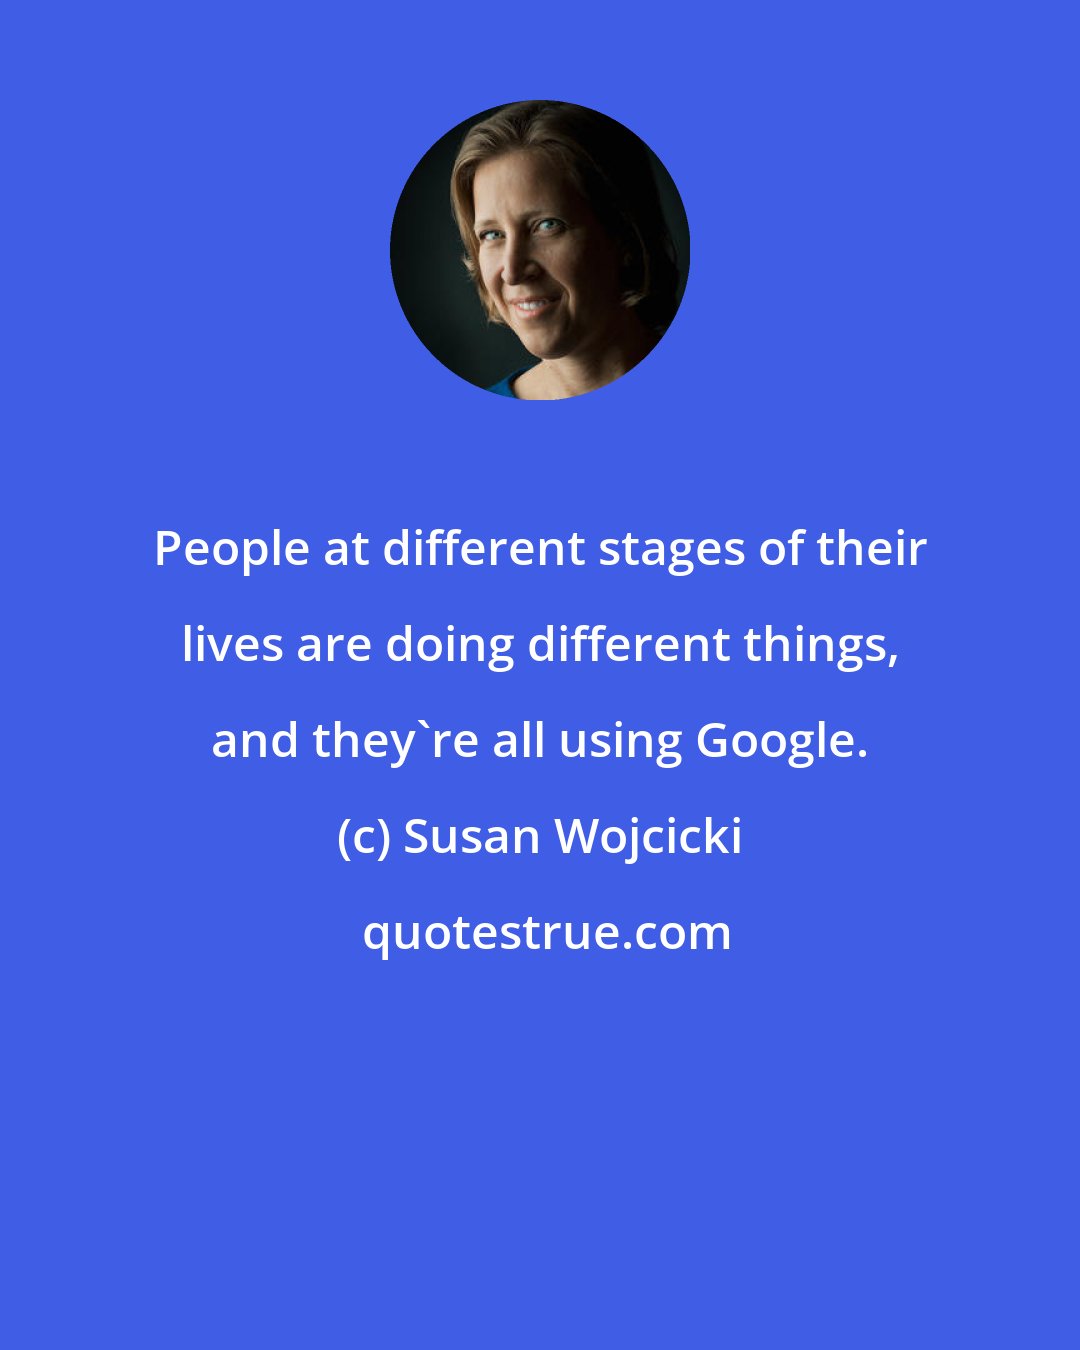 Susan Wojcicki: People at different stages of their lives are doing different things, and they're all using Google.